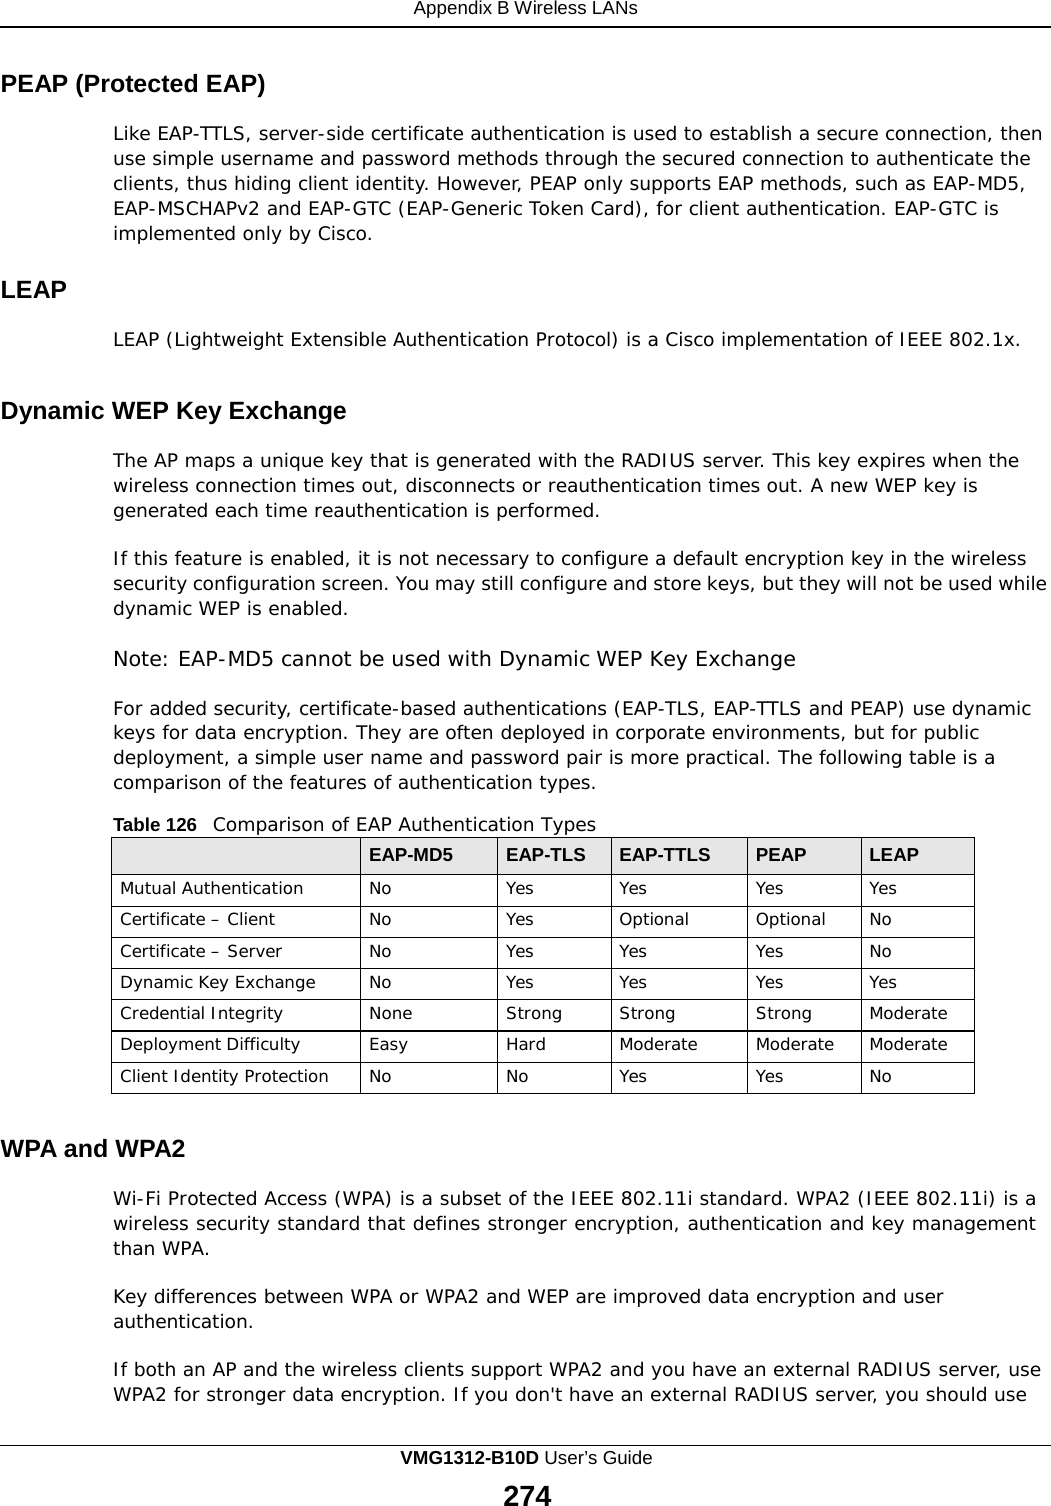 Appendix B Wireless LANs    PEAP (Protected EAP)  Like EAP-TTLS, server-side certificate authentication is used to establish a secure connection, then use simple username and password methods through the secured connection to authenticate the clients, thus hiding client identity. However, PEAP only supports EAP methods, such as EAP-MD5, EAP-MSCHAPv2 and EAP-GTC (EAP-Generic Token Card), for client authentication. EAP-GTC is implemented only by Cisco.  LEAP  LEAP (Lightweight Extensible Authentication Protocol) is a Cisco implementation of IEEE 802.1x.   Dynamic WEP Key Exchange  The AP maps a unique key that is generated with the RADIUS server. This key expires when the wireless connection times out, disconnects or reauthentication times out. A new WEP key is generated each time reauthentication is performed.  If this feature is enabled, it is not necessary to configure a default encryption key in the wireless security configuration screen. You may still configure and store keys, but they will not be used while dynamic WEP is enabled.  Note: EAP-MD5 cannot be used with Dynamic WEP Key Exchange  For added security, certificate-based authentications (EAP-TLS, EAP-TTLS and PEAP) use dynamic keys for data encryption. They are often deployed in corporate environments, but for public deployment, a simple user name and password pair is more practical. The following table is a comparison of the features of authentication types.  Table 126   Comparison of EAP Authentication Types   EAP-MD5 EAP-TLS EAP-TTLS PEAP LEAP Mutual Authentication No Yes Yes Yes Yes Certificate – Client No Yes Optional Optional No Certificate – Server No Yes Yes Yes No Dynamic Key Exchange No Yes Yes Yes Yes Credential Integrity None Strong Strong Strong Moderate Deployment Difficulty Easy Hard Moderate Moderate Moderate Client Identity Protection No No Yes Yes No   WPA and WPA2  Wi-Fi Protected Access (WPA) is a subset of the IEEE 802.11i standard. WPA2 (IEEE 802.11i) is a wireless security standard that defines stronger encryption, authentication and key management than WPA.  Key differences between WPA or WPA2 and WEP are improved data encryption and user authentication.  If both an AP and the wireless clients support WPA2 and you have an external RADIUS server, use WPA2 for stronger data encryption. If you don&apos;t have an external RADIUS server, you should use VMG1312-B10D User’s Guide 274  